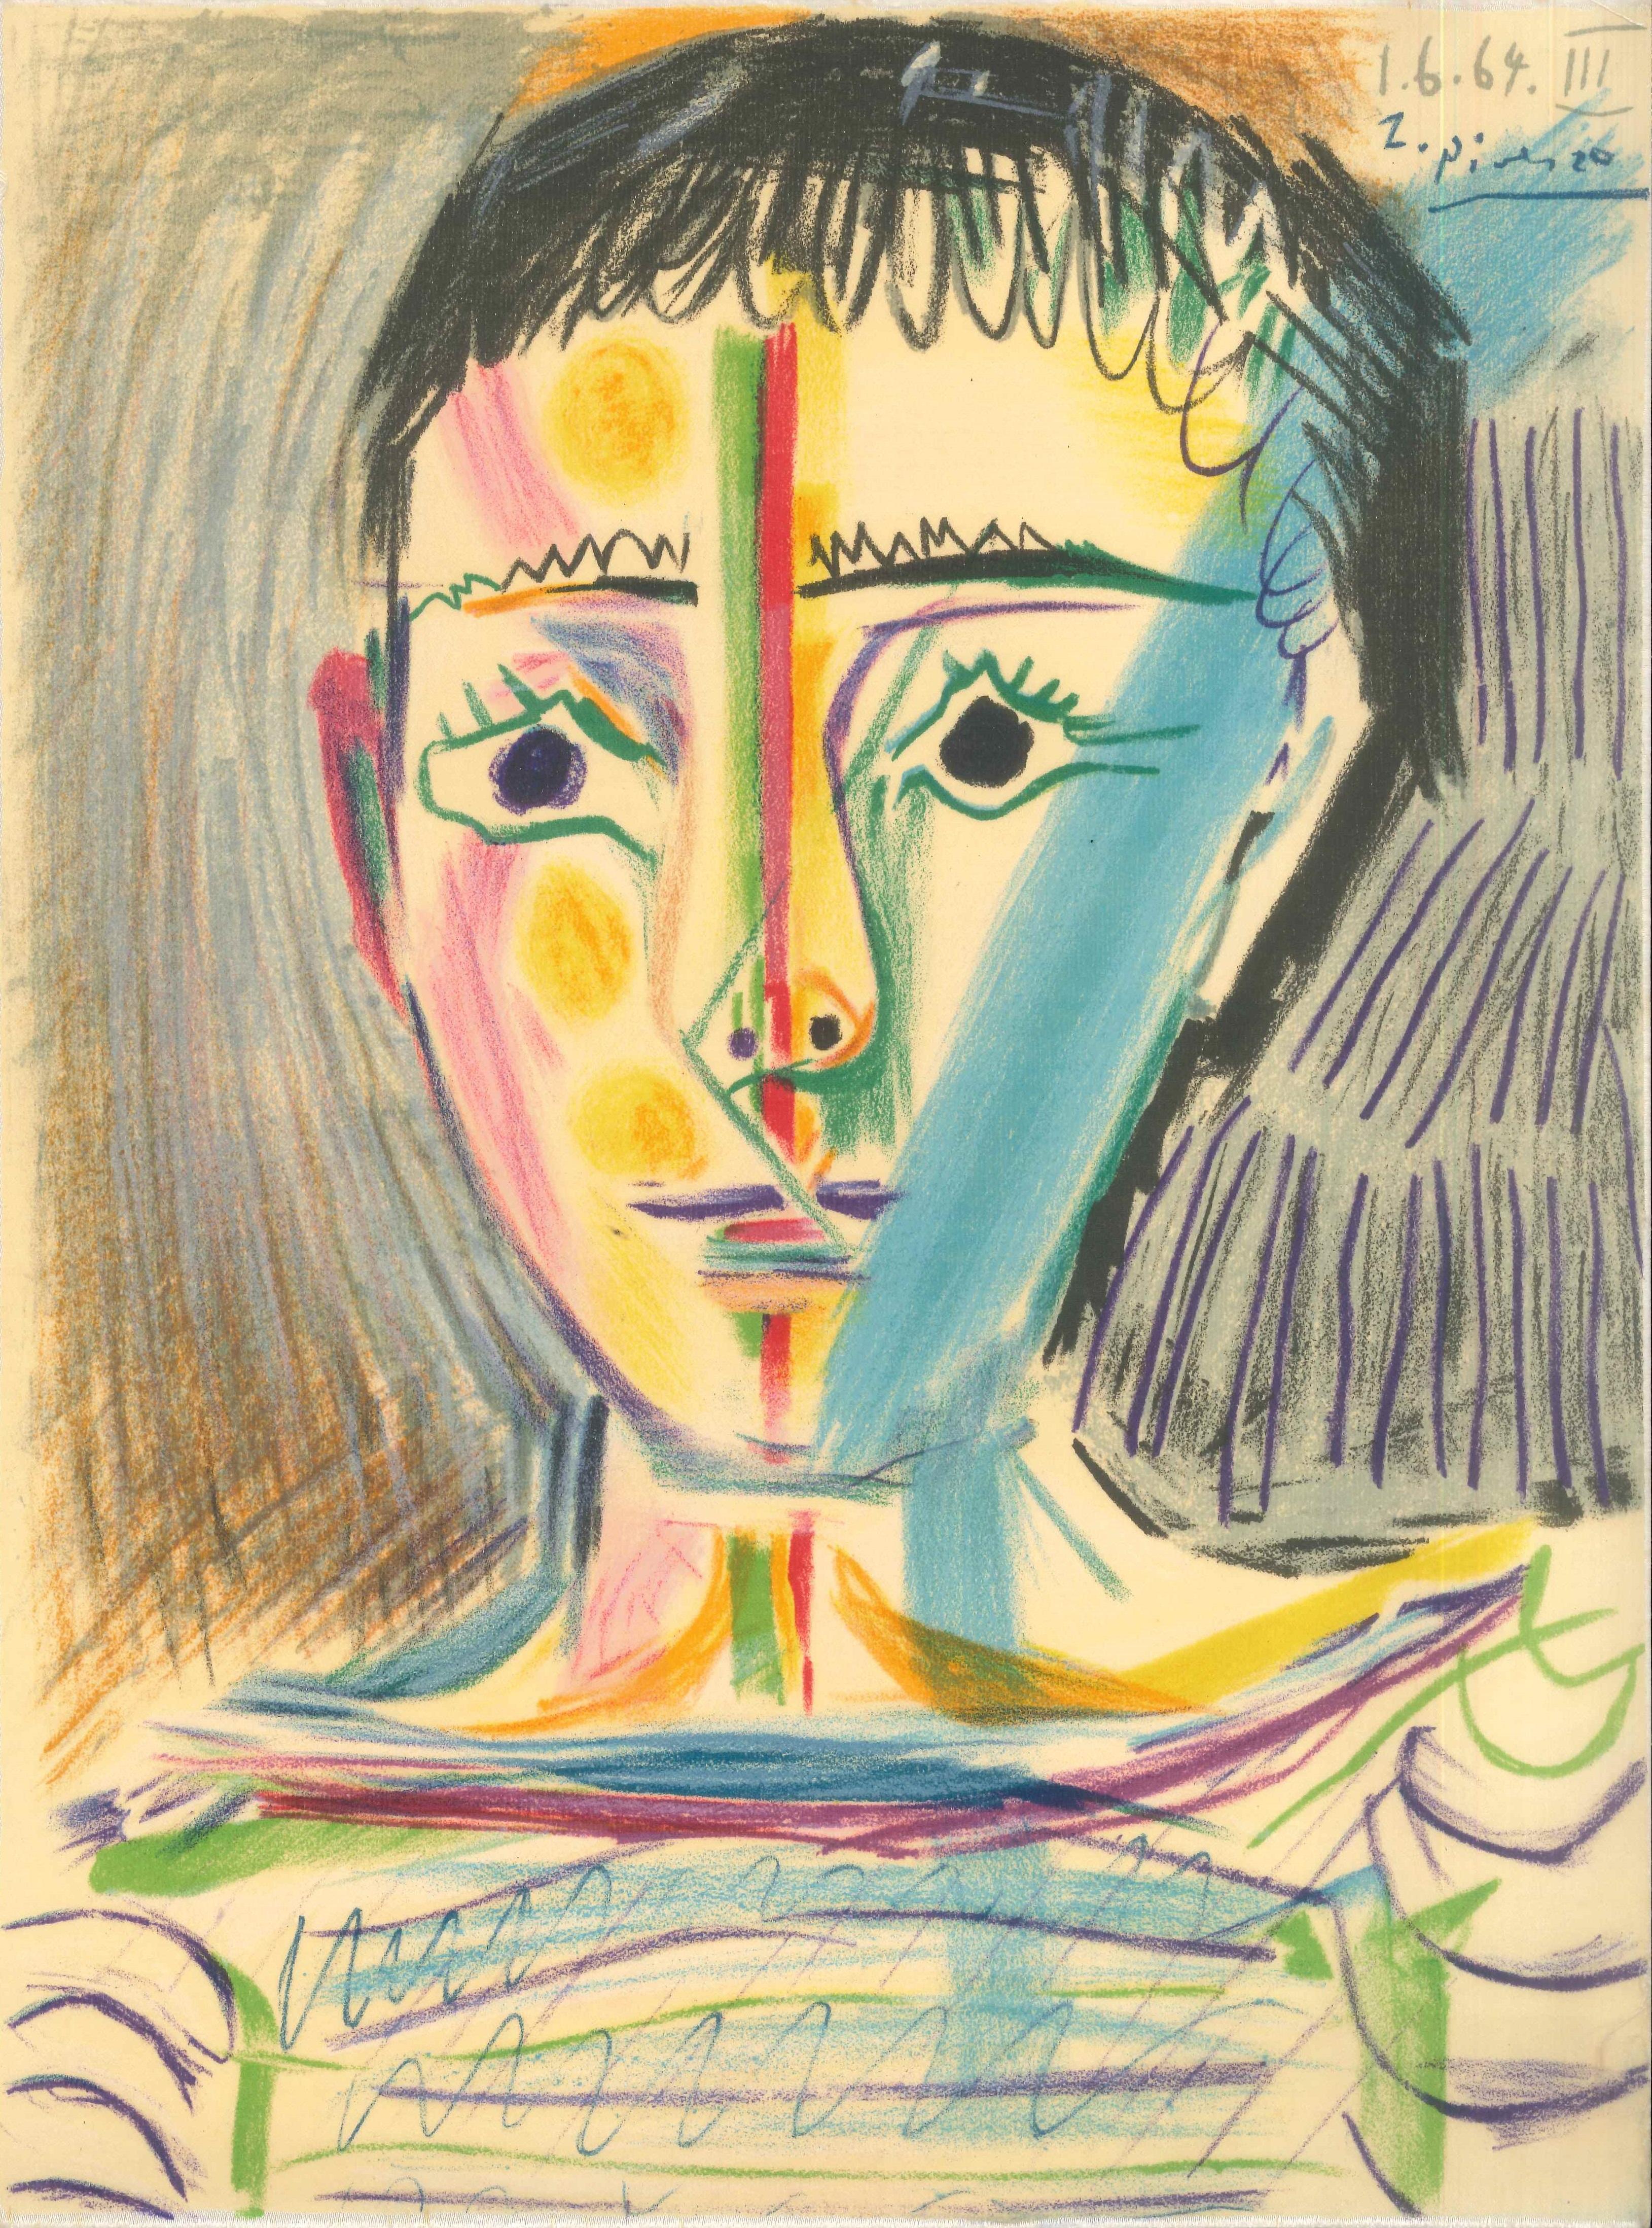 unsigned picasso lithograph value